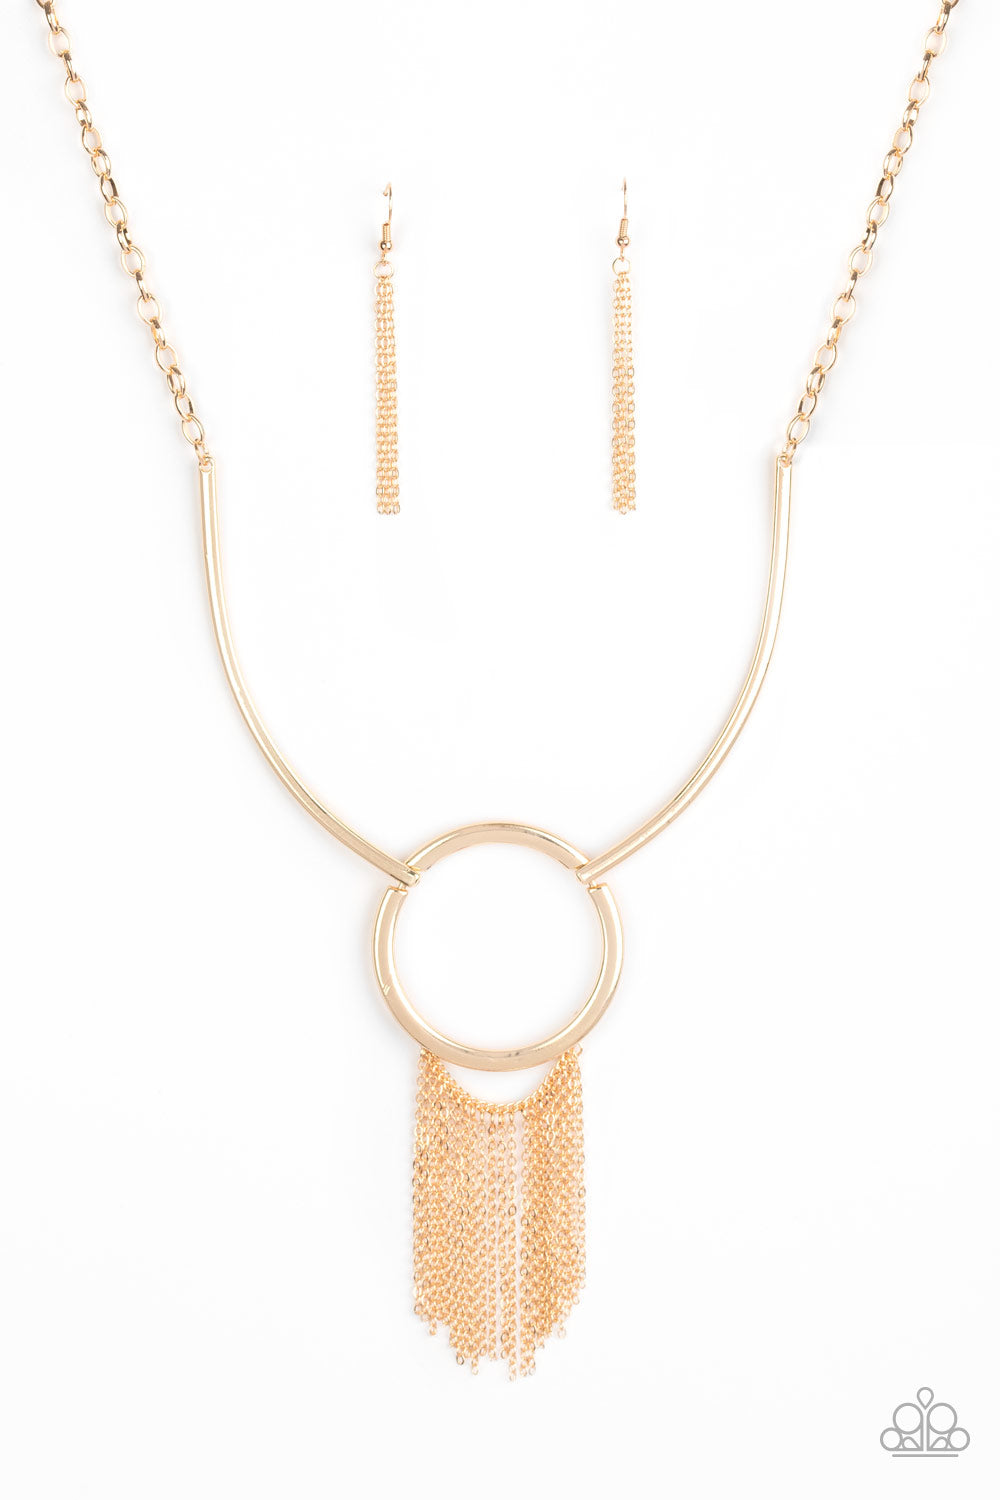 Pharaoh Paradise Gold Necklace - Paparazzi Accessories